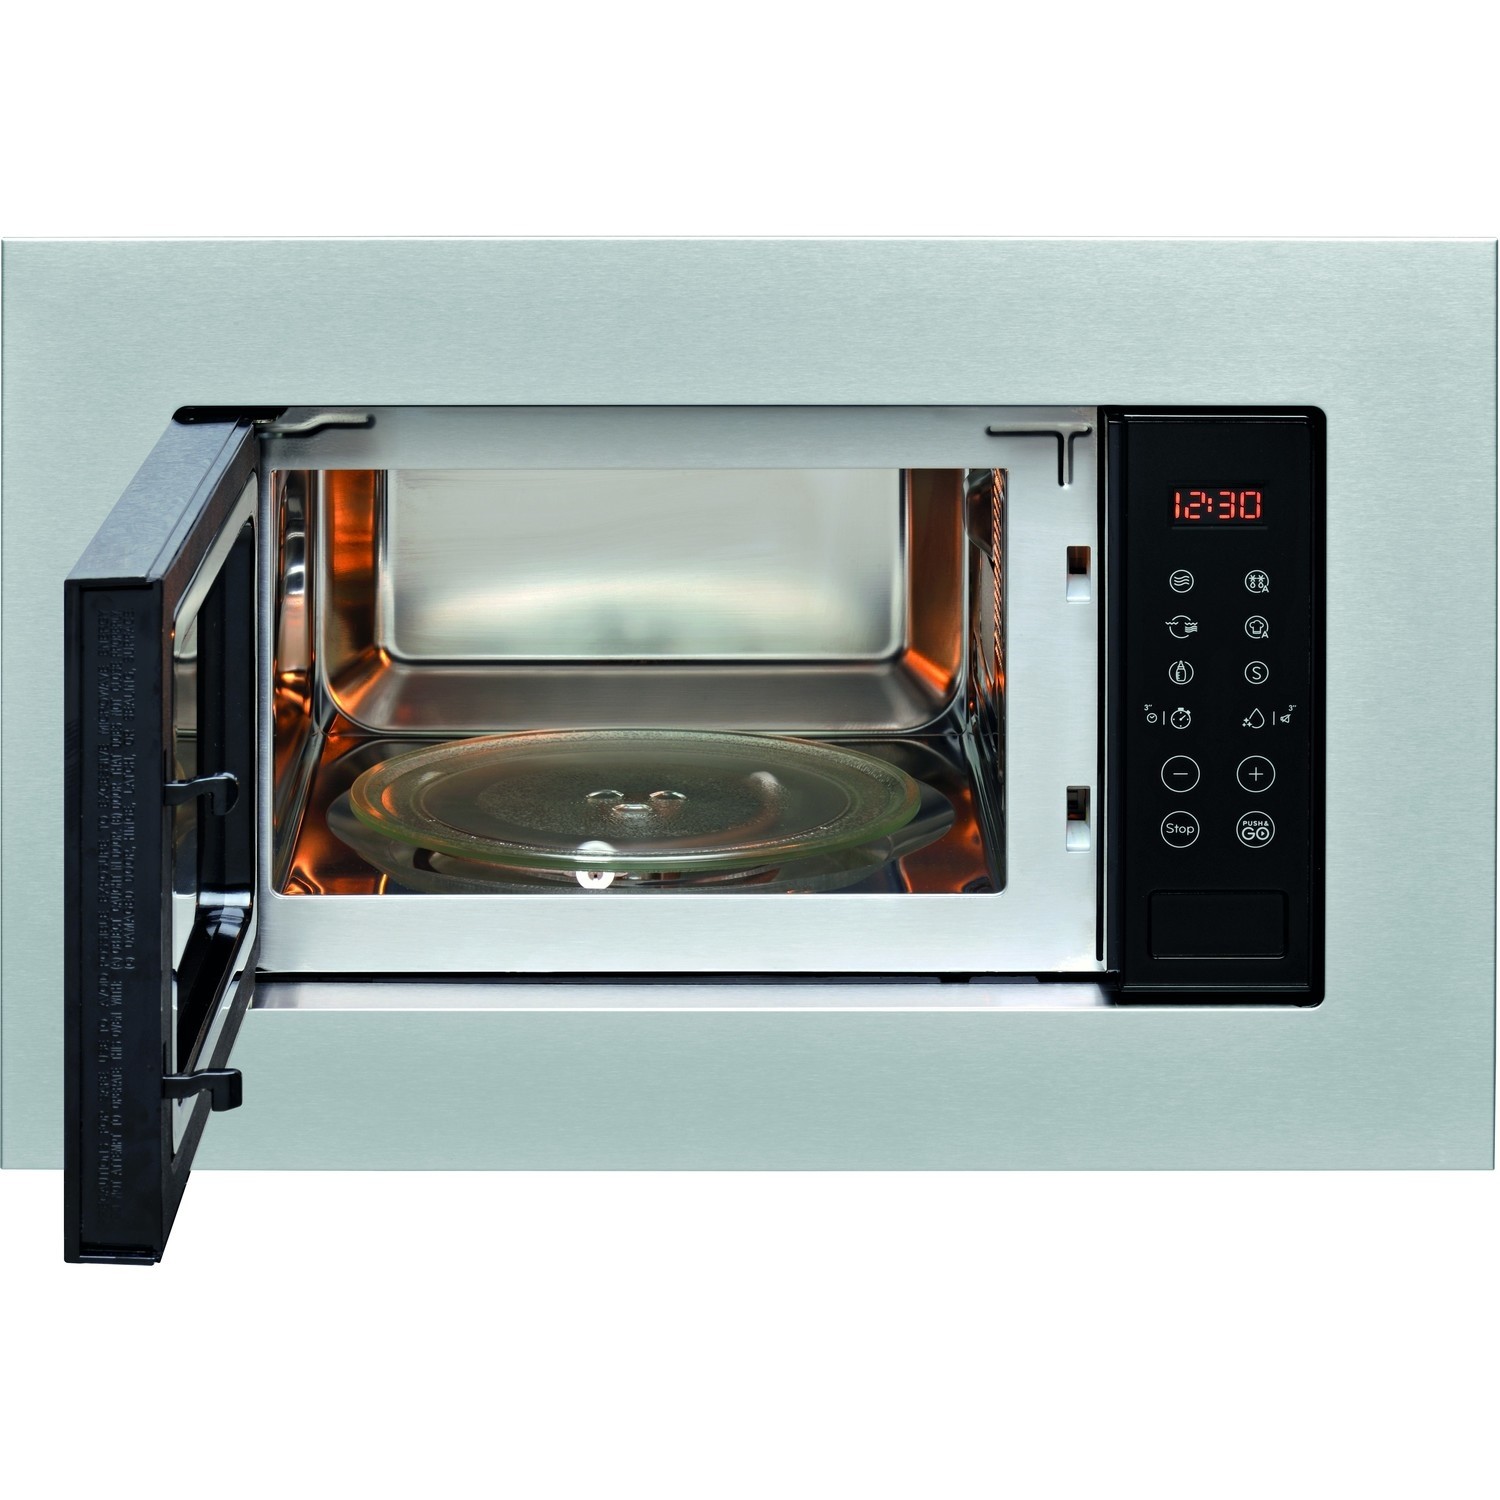 Indesit MWI120GX 20L 800W Built-in Microwave & Grill - Stainless Steel